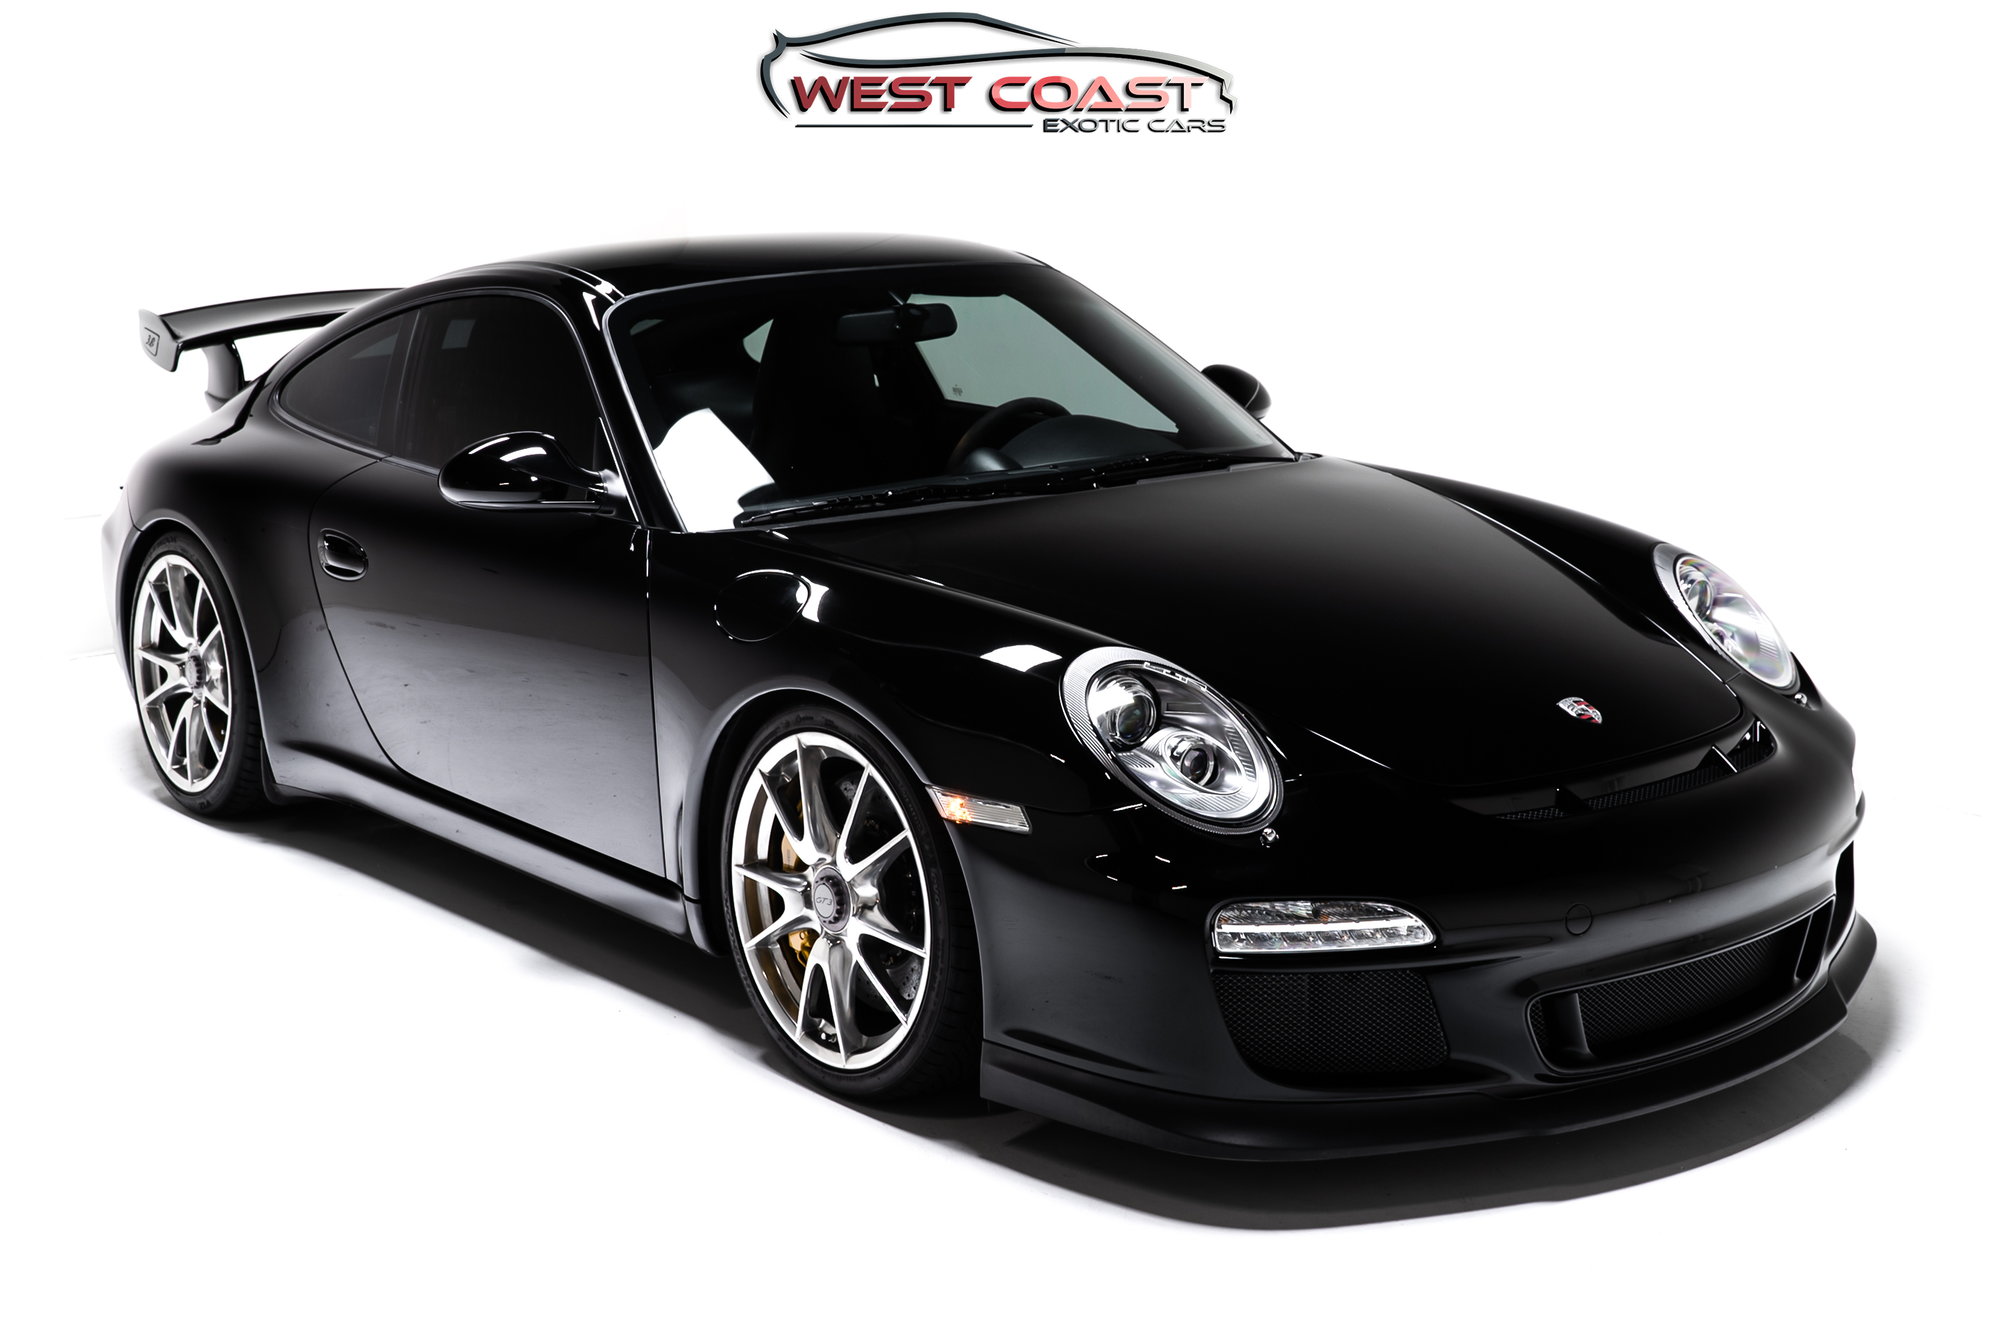 2010 Porsche GT3 - 2010 Porsche 911 GT3 w/ CCB's - Used - VIN WP0AC2A90AS783511 - 29,074 Miles - 6 cyl - 2WD - Manual - Coupe - Black - Murrieta, CA 92562, United States